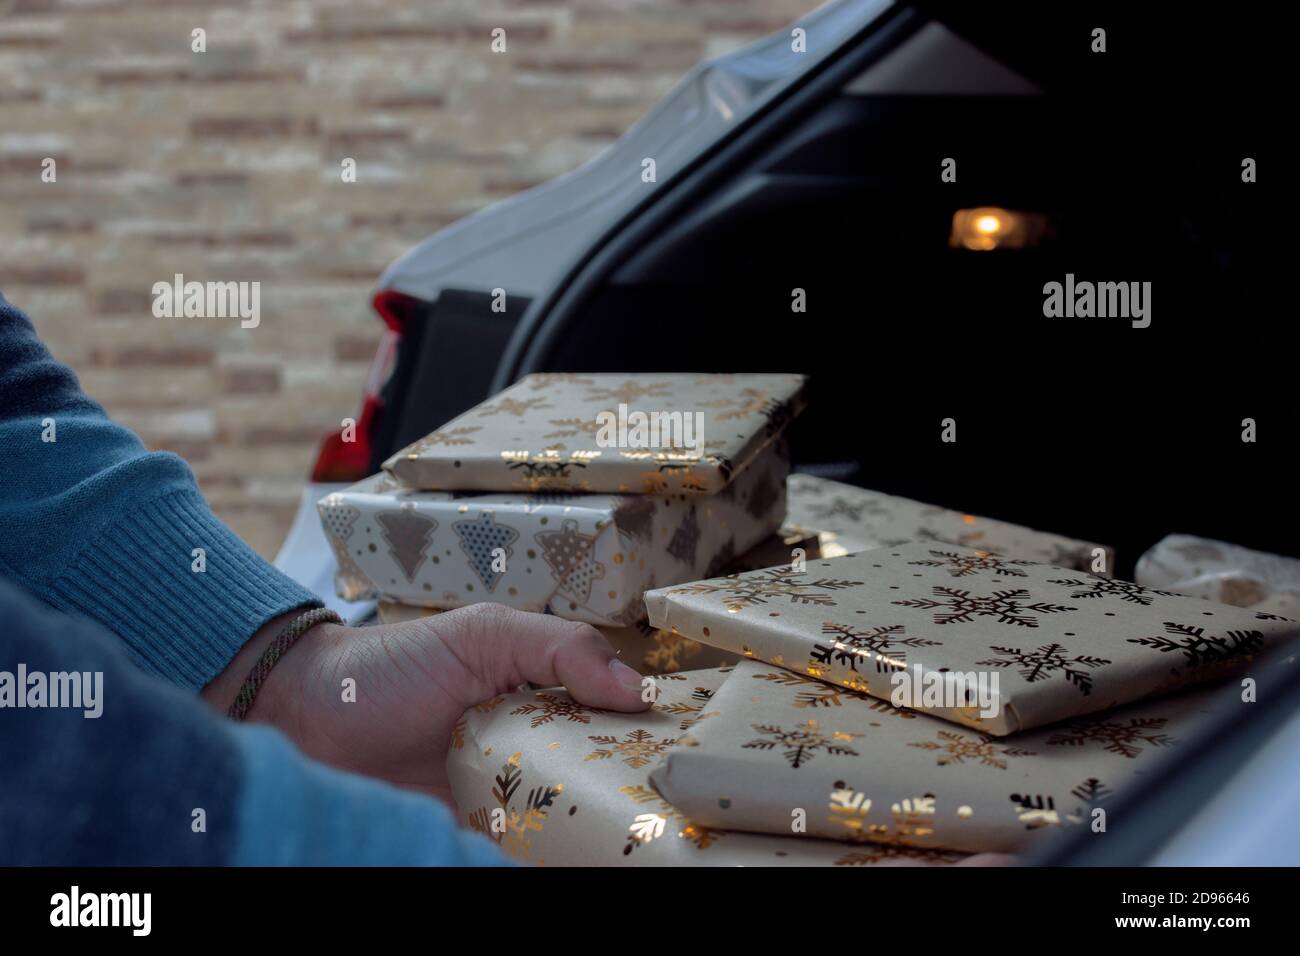 A man consumer takes out of the car Christmas gifts that he has just bought to put under the Christmas tree at home. Christmas photography 2020. Stock Photo